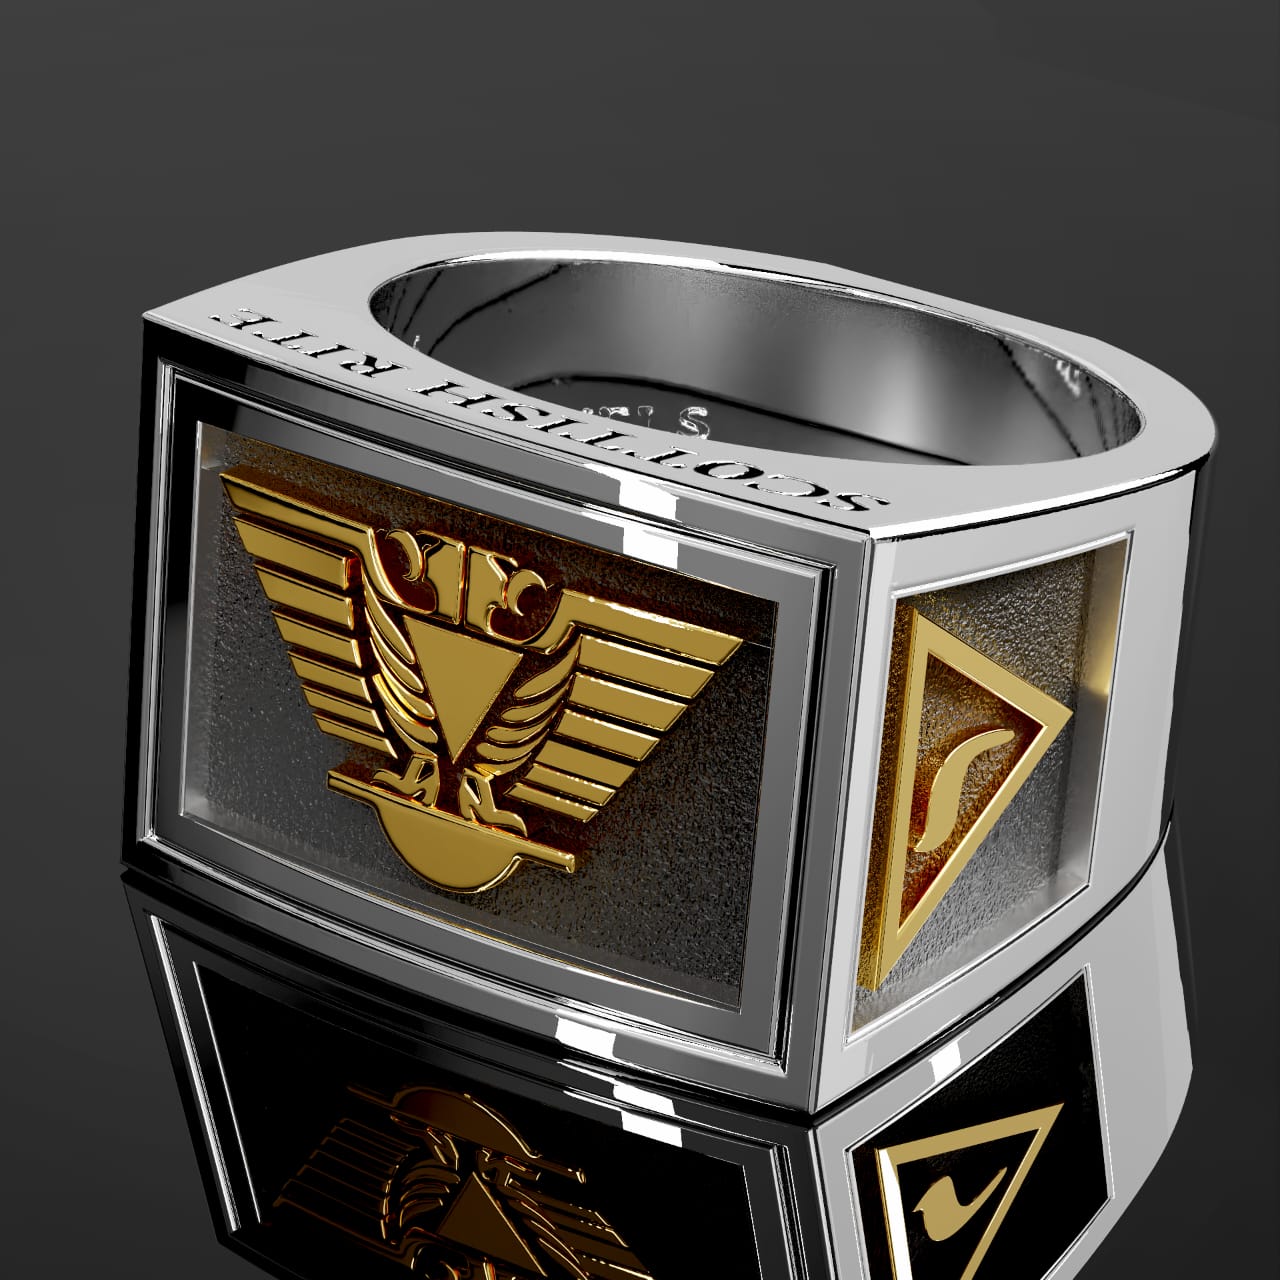 Men's Two-Tone Scottish Rite 925 Sterling Silver and 14k Yellow Gold Masonic Ring